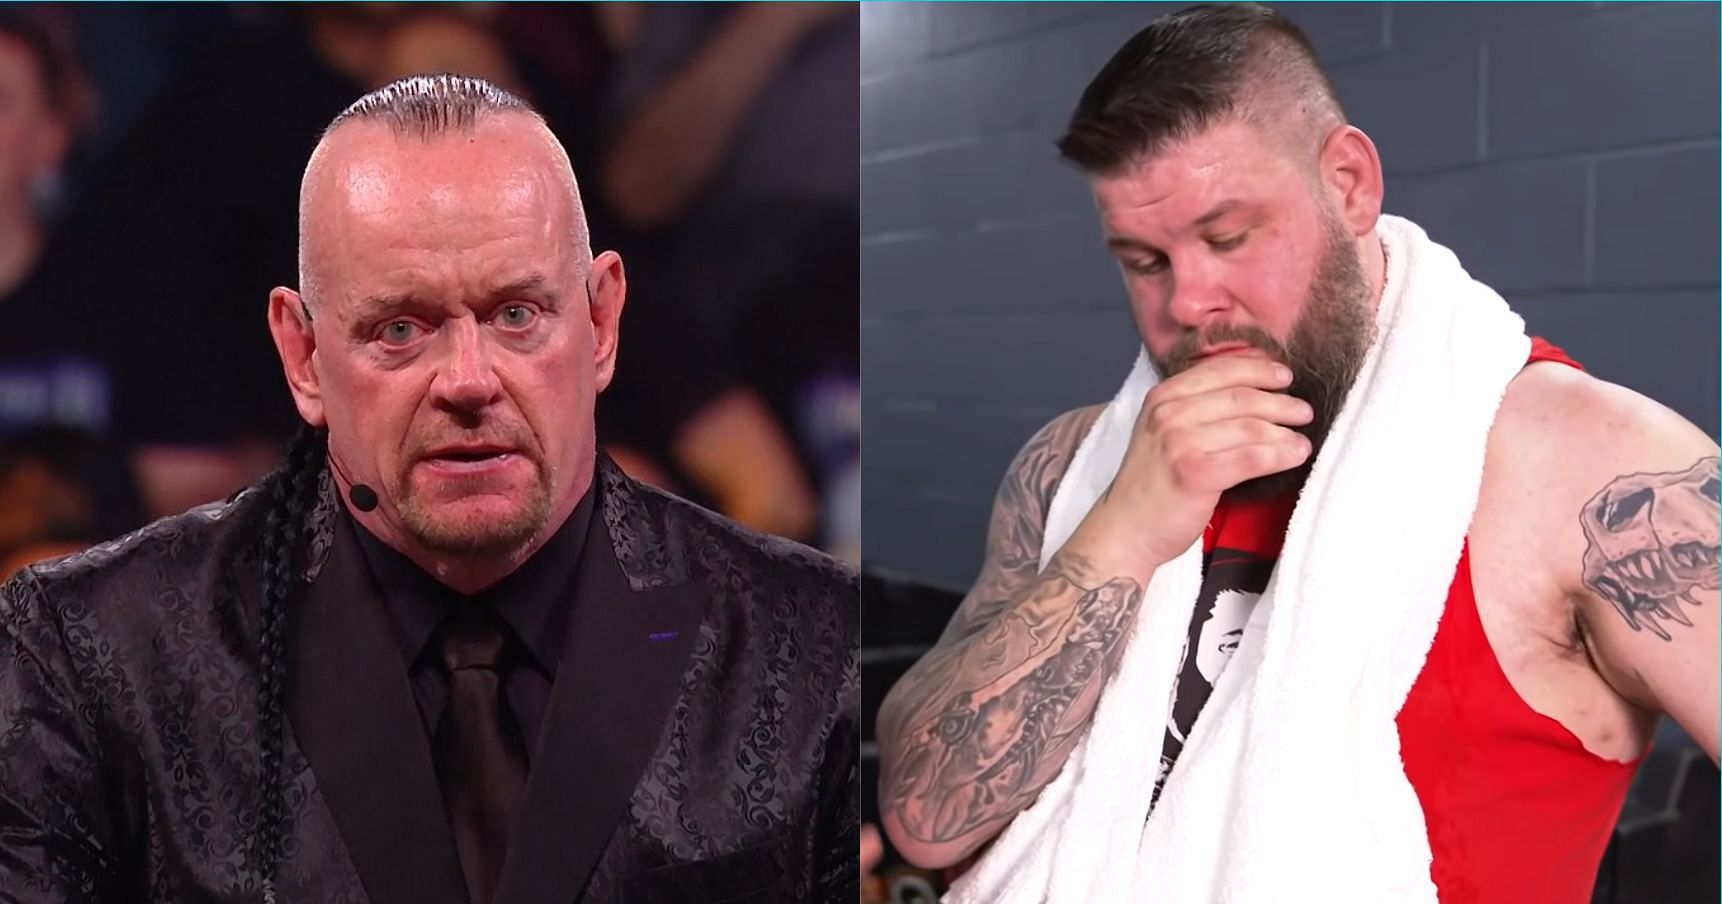 The Undertaker and Kevin Owens have been featured in the news roundup.